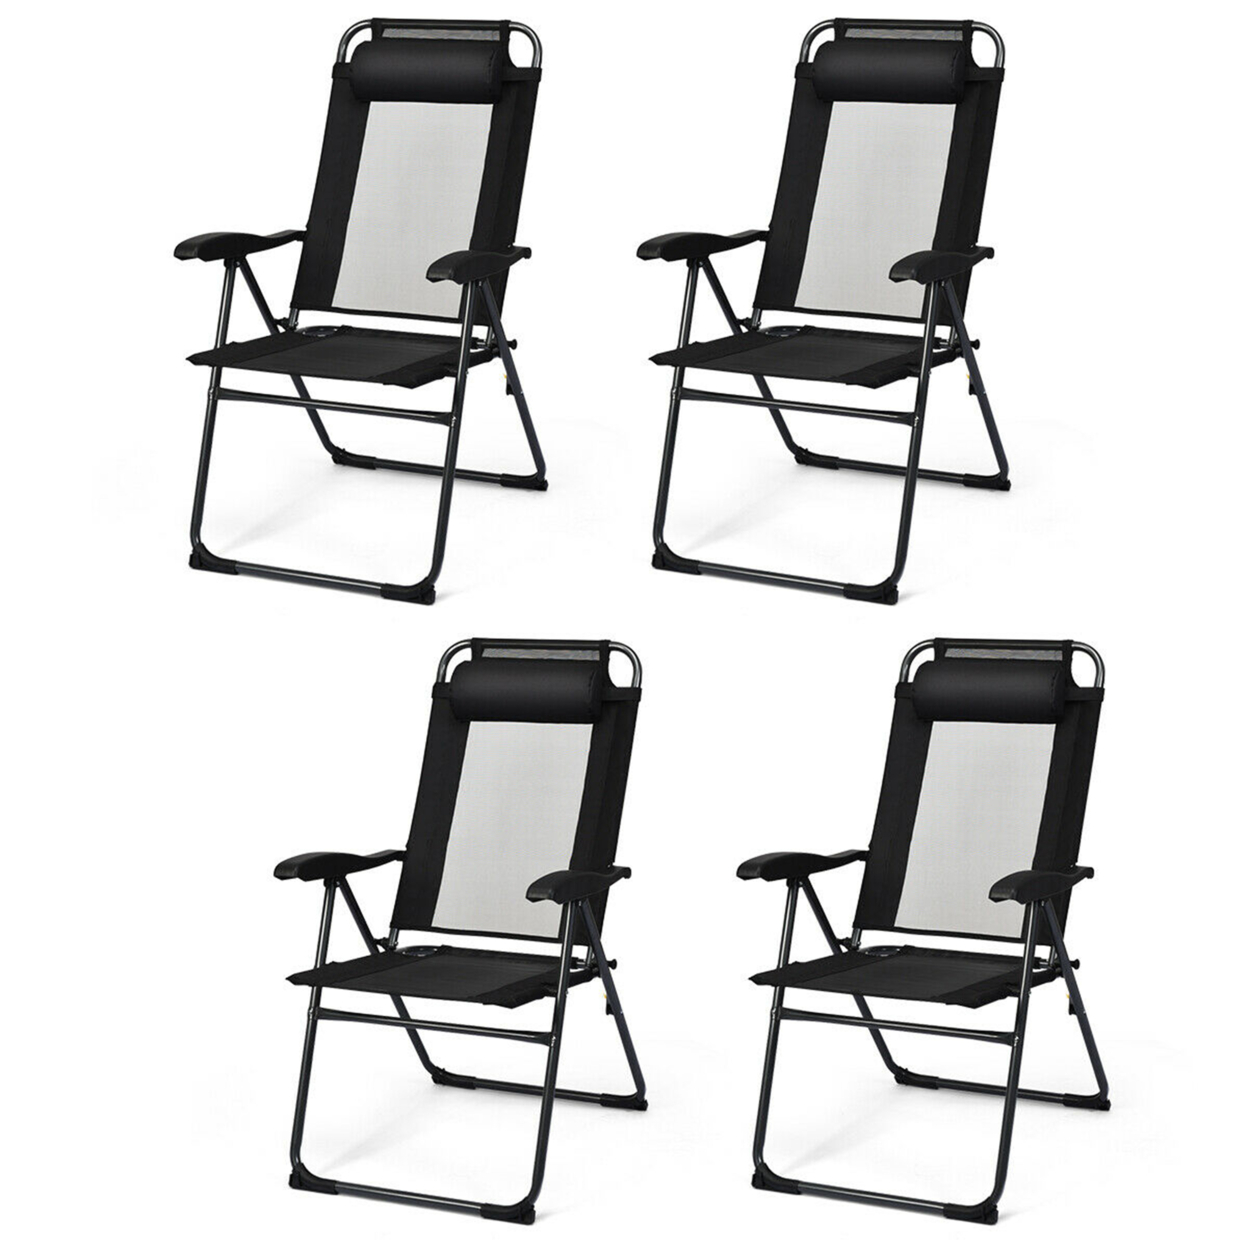 4PC Folding Chairs Adjustable Reclining Chairs With Headrest Patio Garden Black